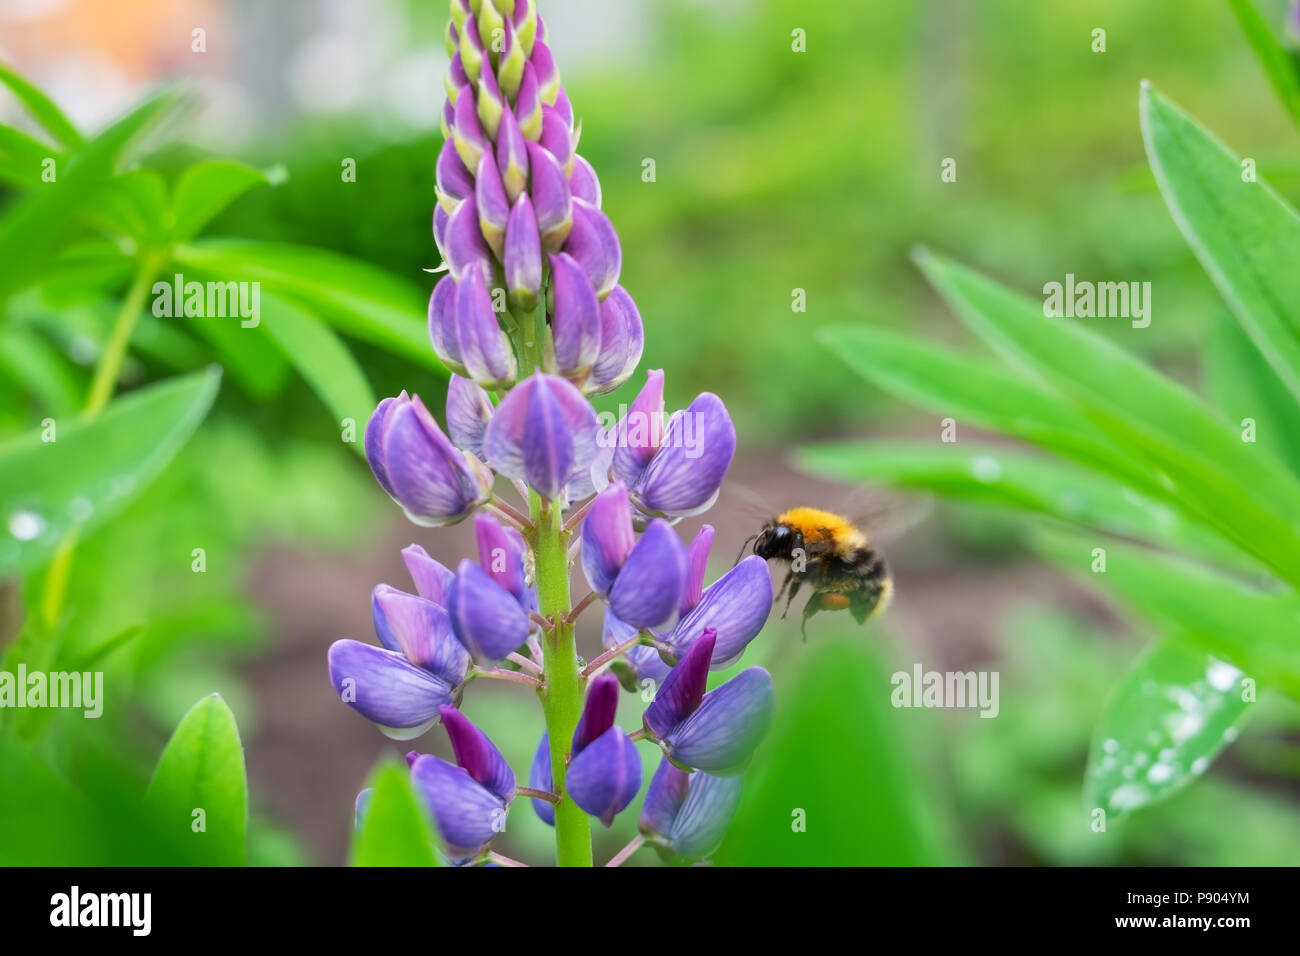 Outdoor lupin fiore. Foto Stock